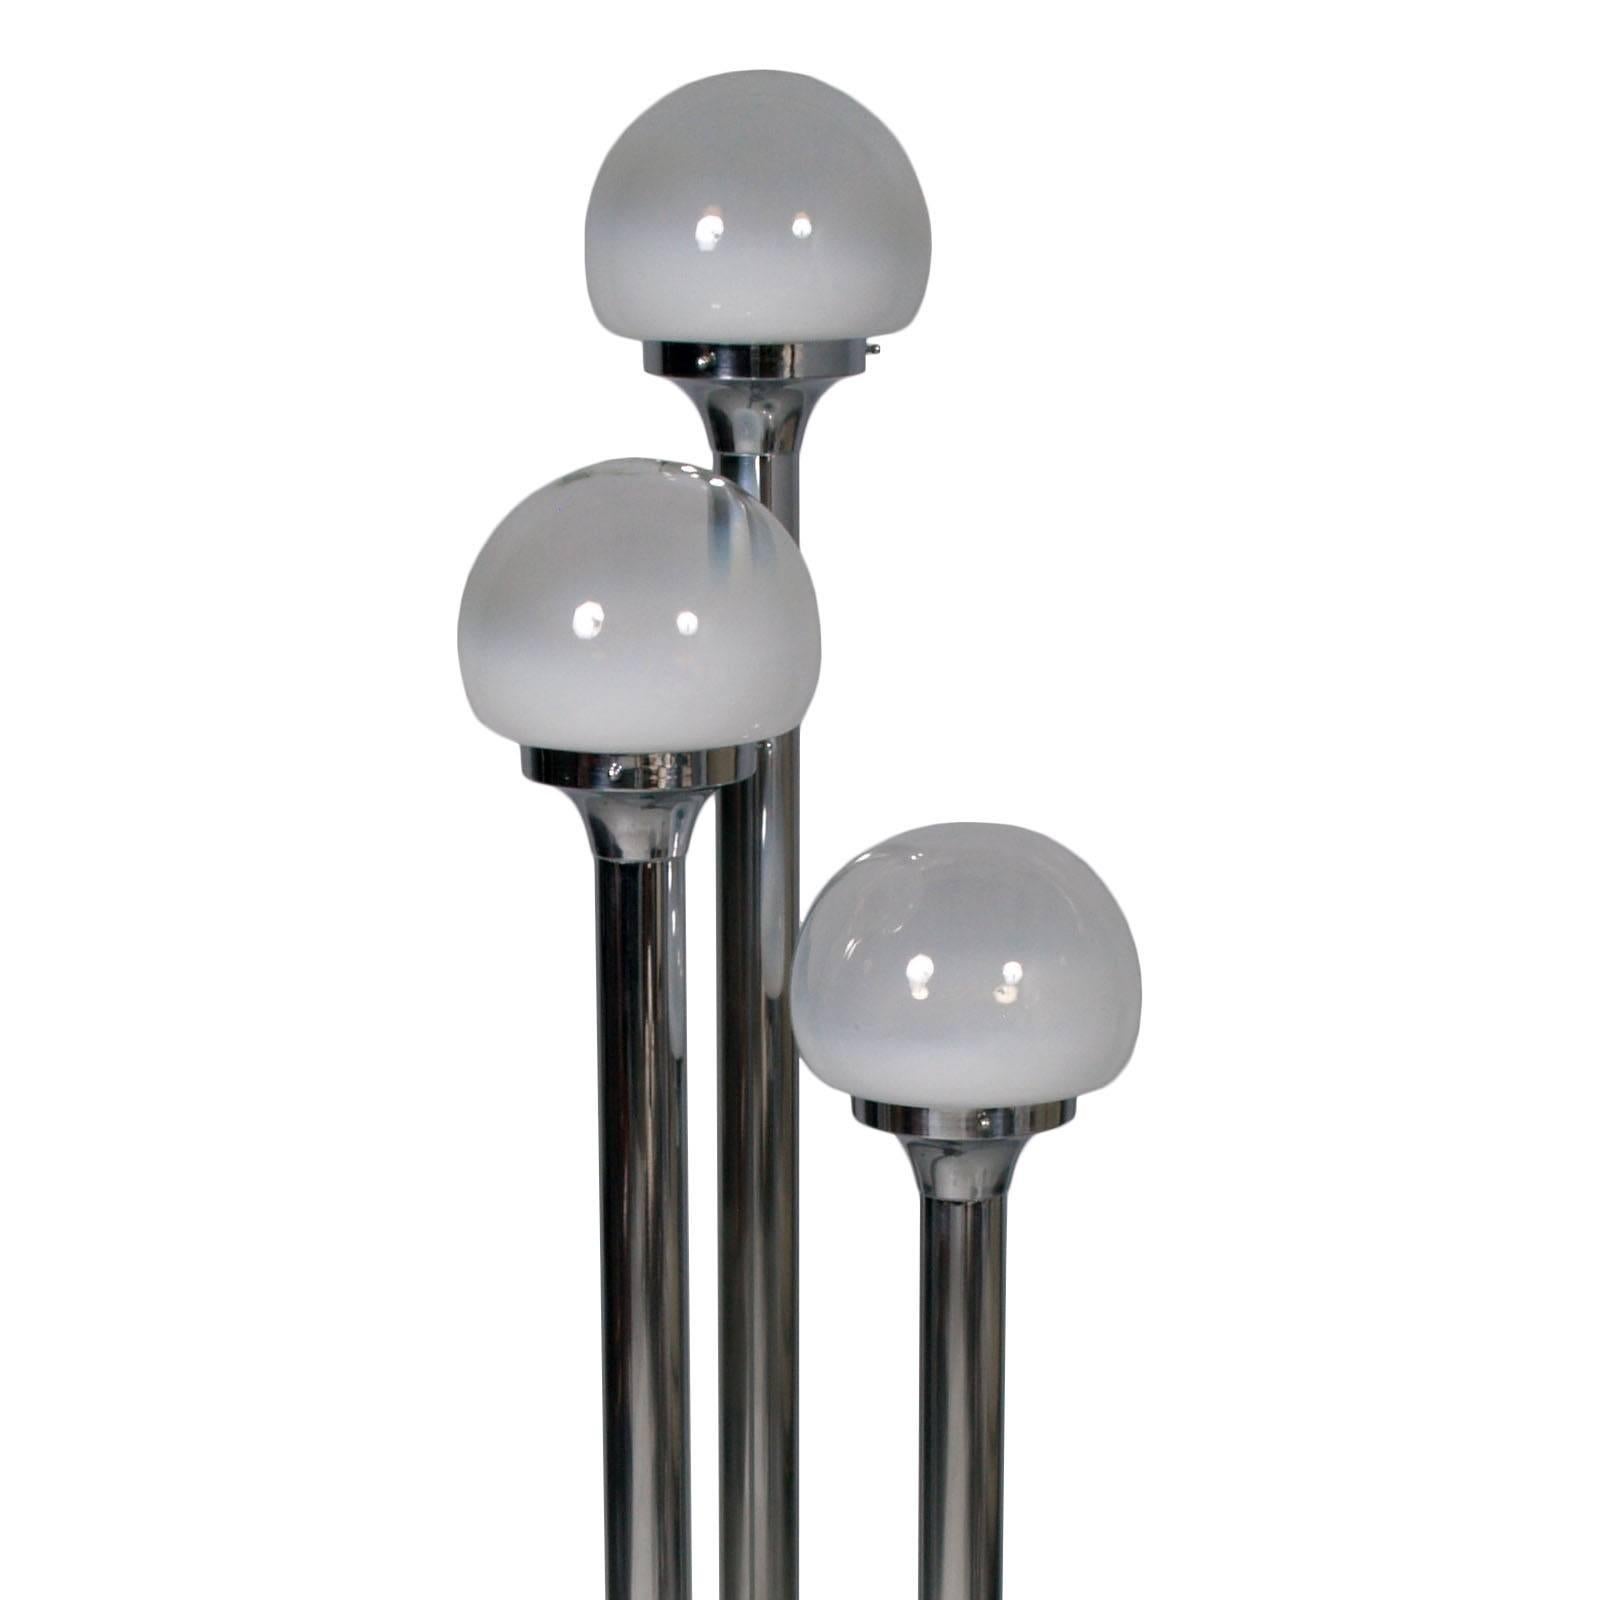 1960s Italy floor lamp with three lights in chromed steel, bowl by Mazzega lattimo Murano-glass, gradually transparent at the top.
Ready-to-use renewed electrical system

Measures cm: D base 30 x D max 40. H145.